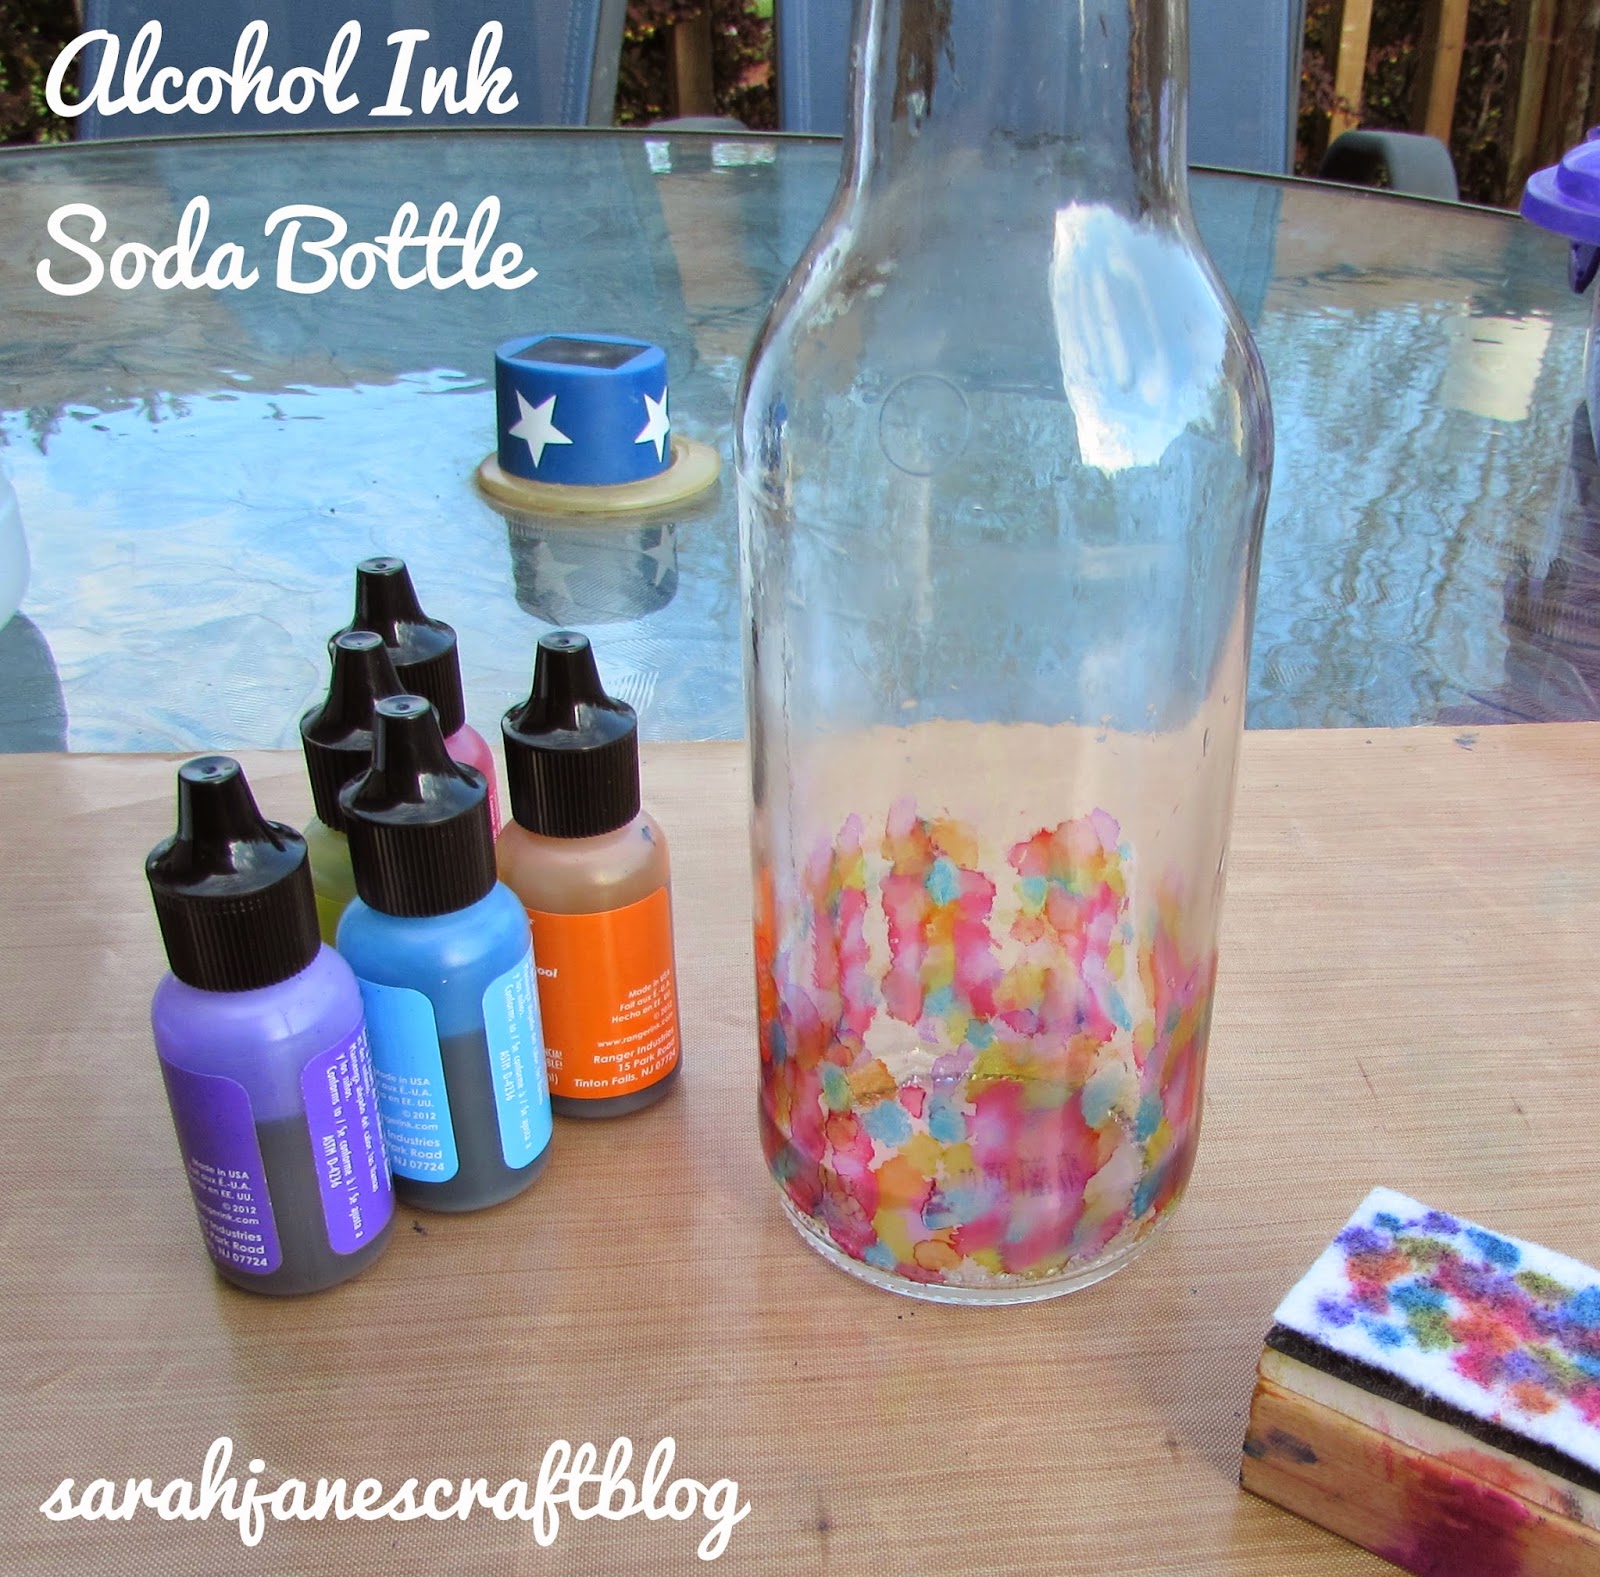 Using Alcohol Inks with Polymer Clay - The Blue Bottle Tree